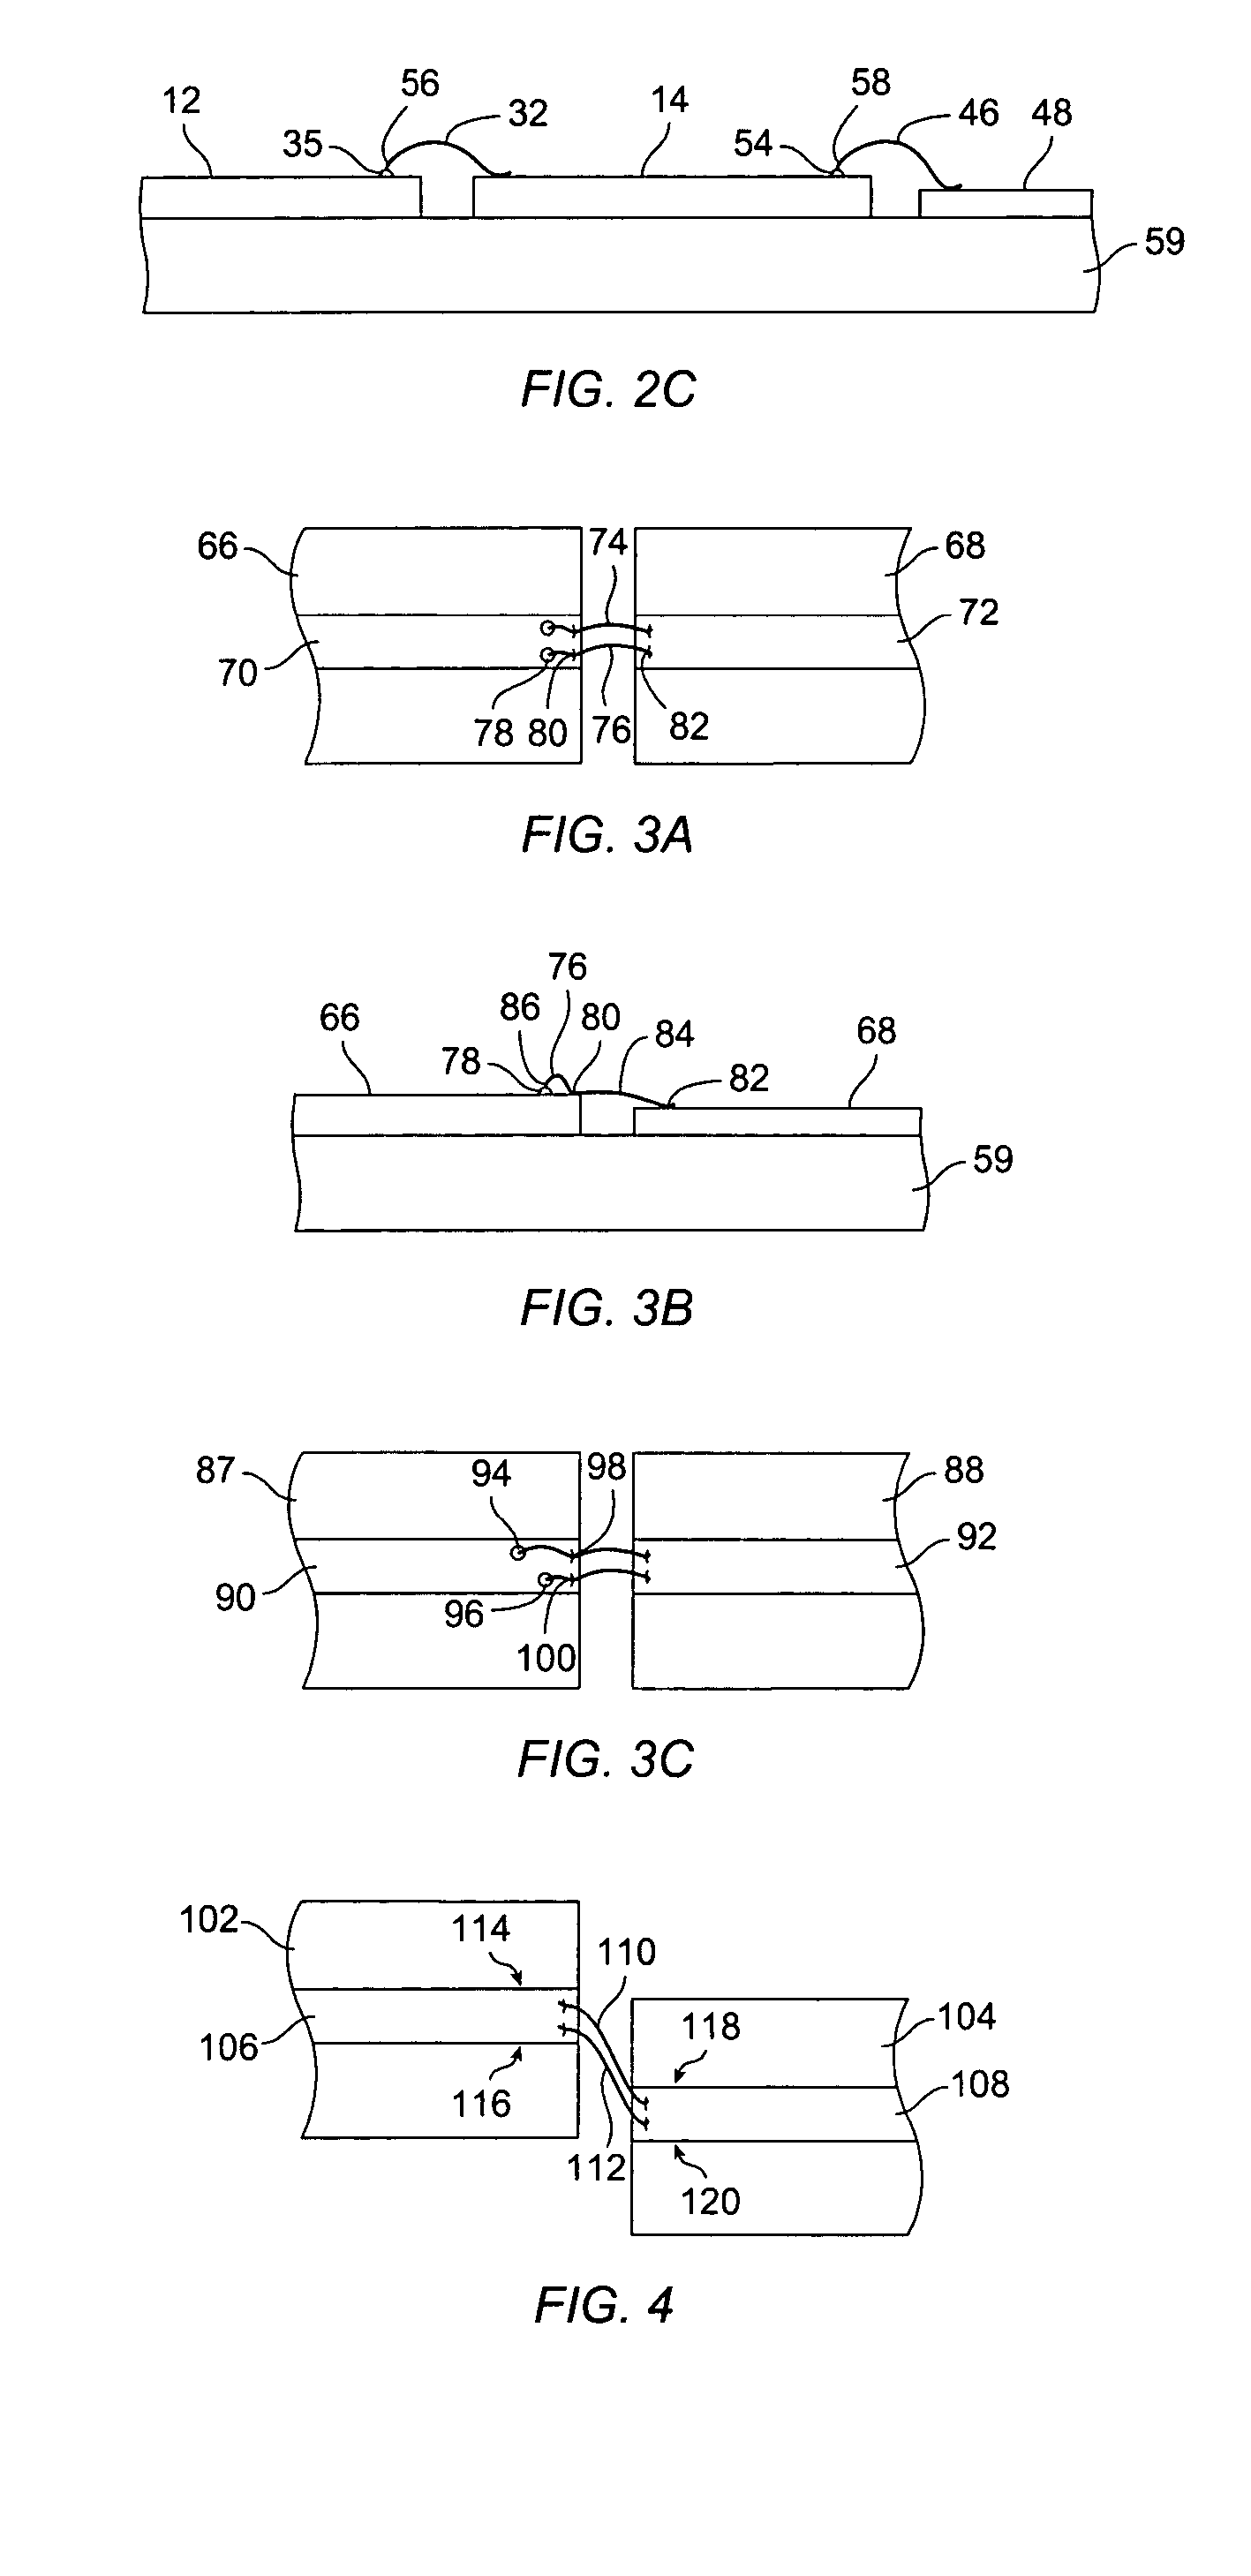 Electrical interconnection for high-frequency devices